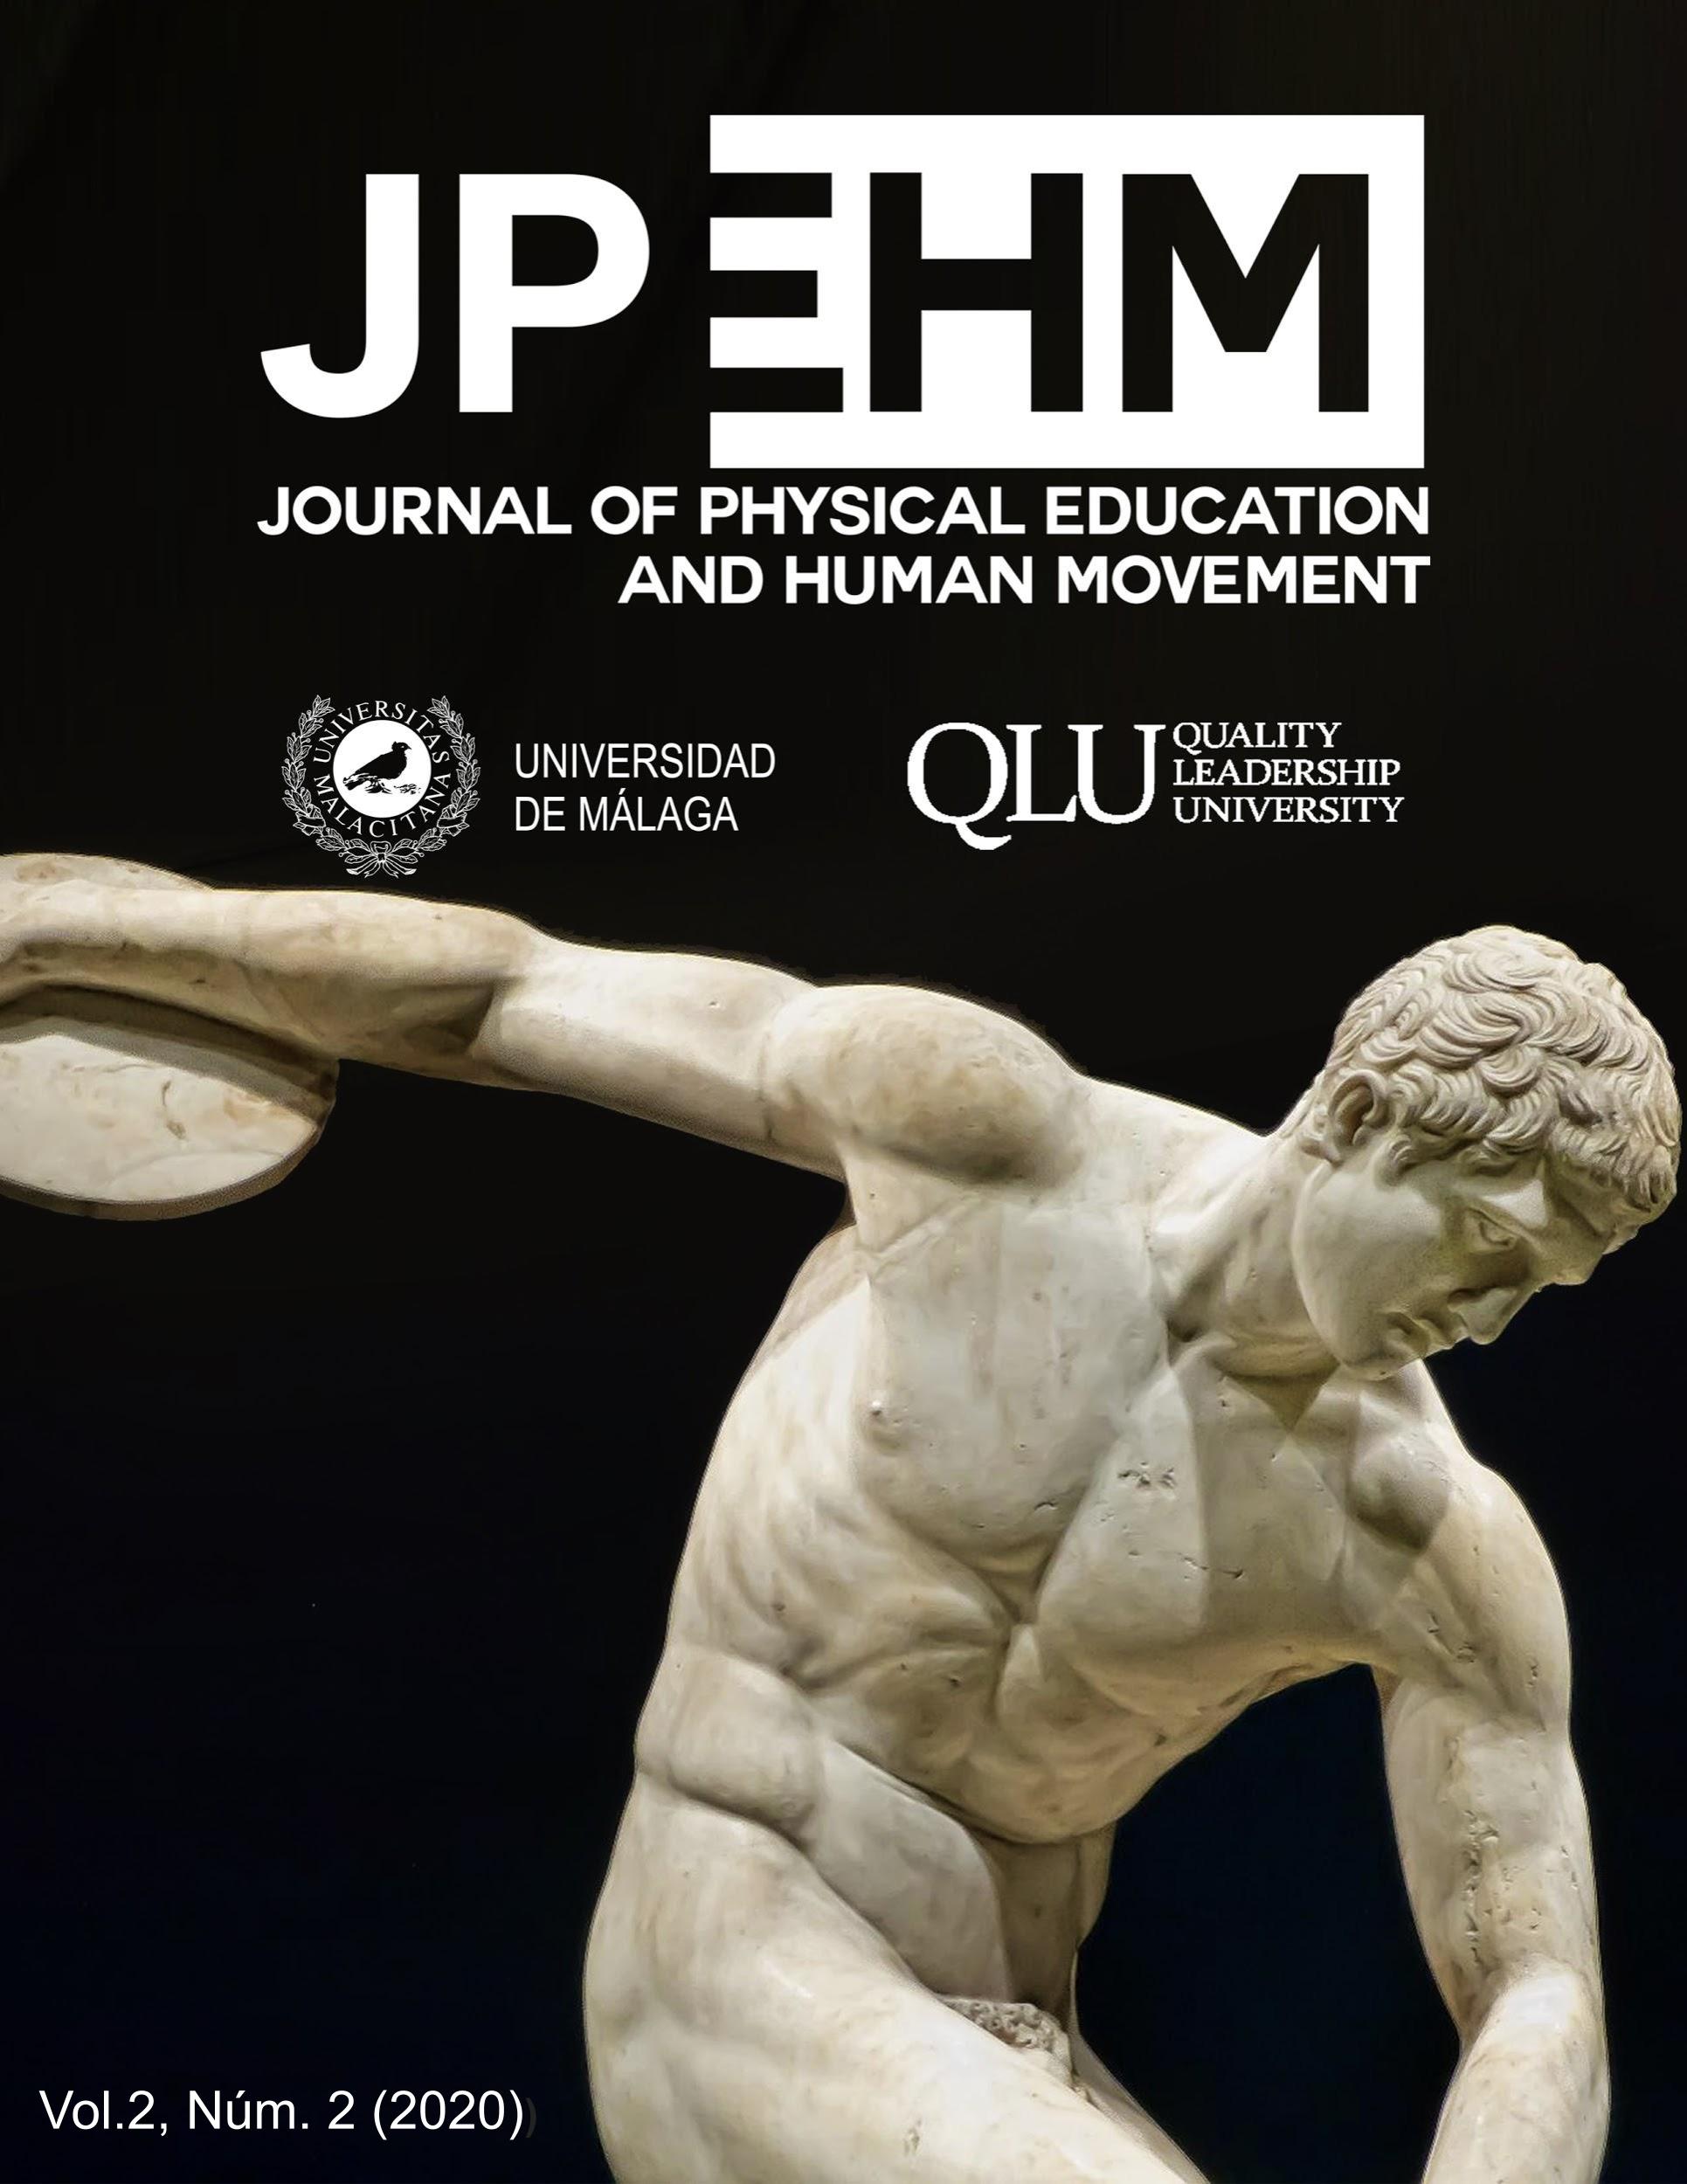 					Ver Vol. 2 Núm. 2 (2020): Journal of Physical Education and Human Movement
				